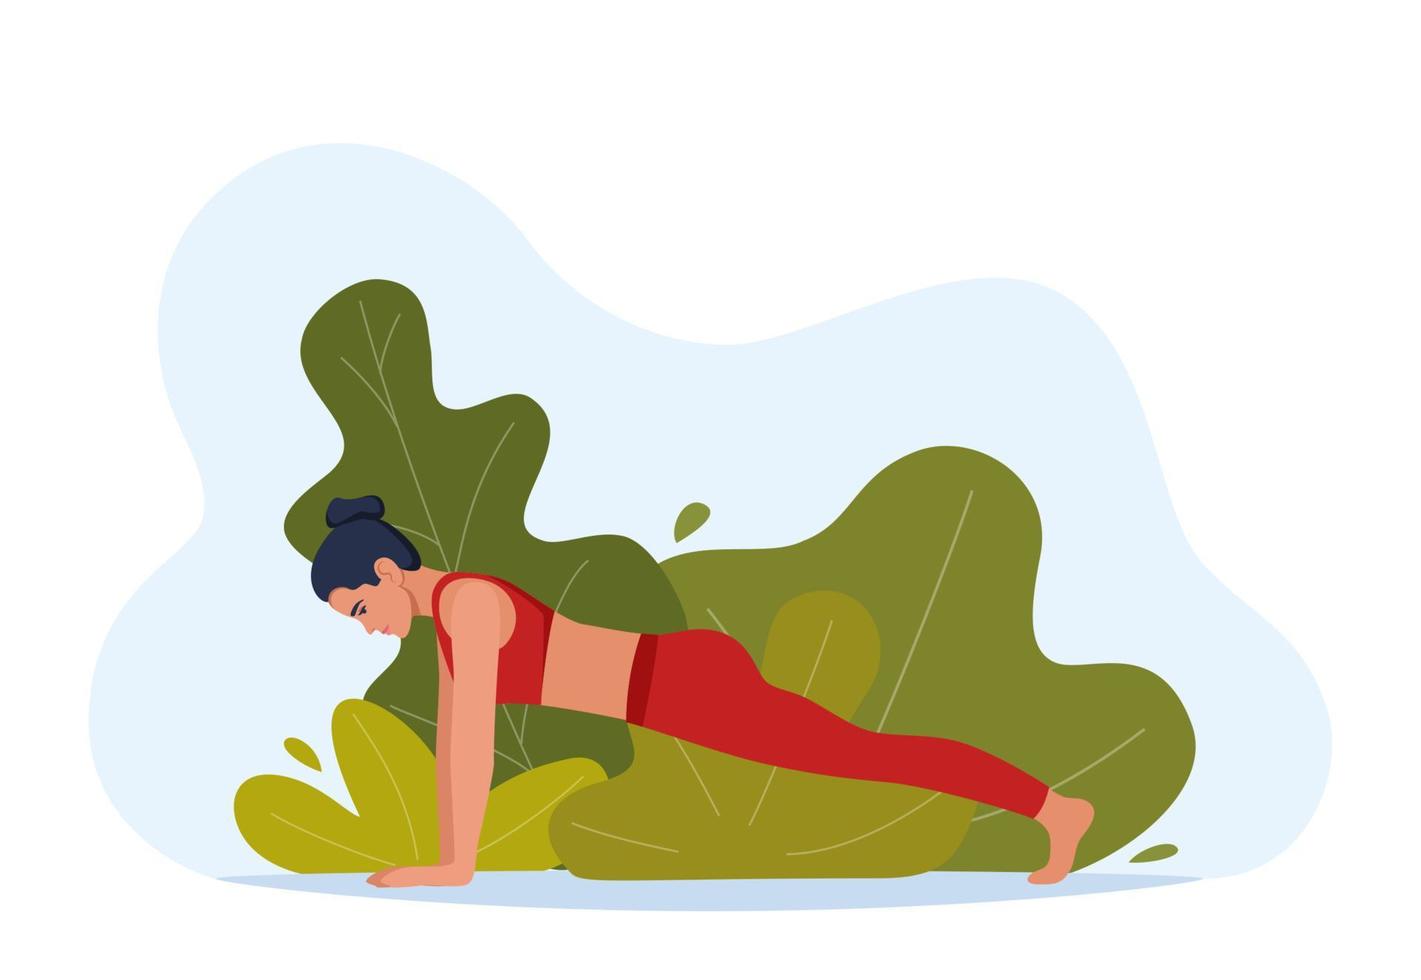 Female character doing yoga exercises on fresh air. Outdoor yoga. Wellness, healthcare and lifestyle concept. Vector illustration.